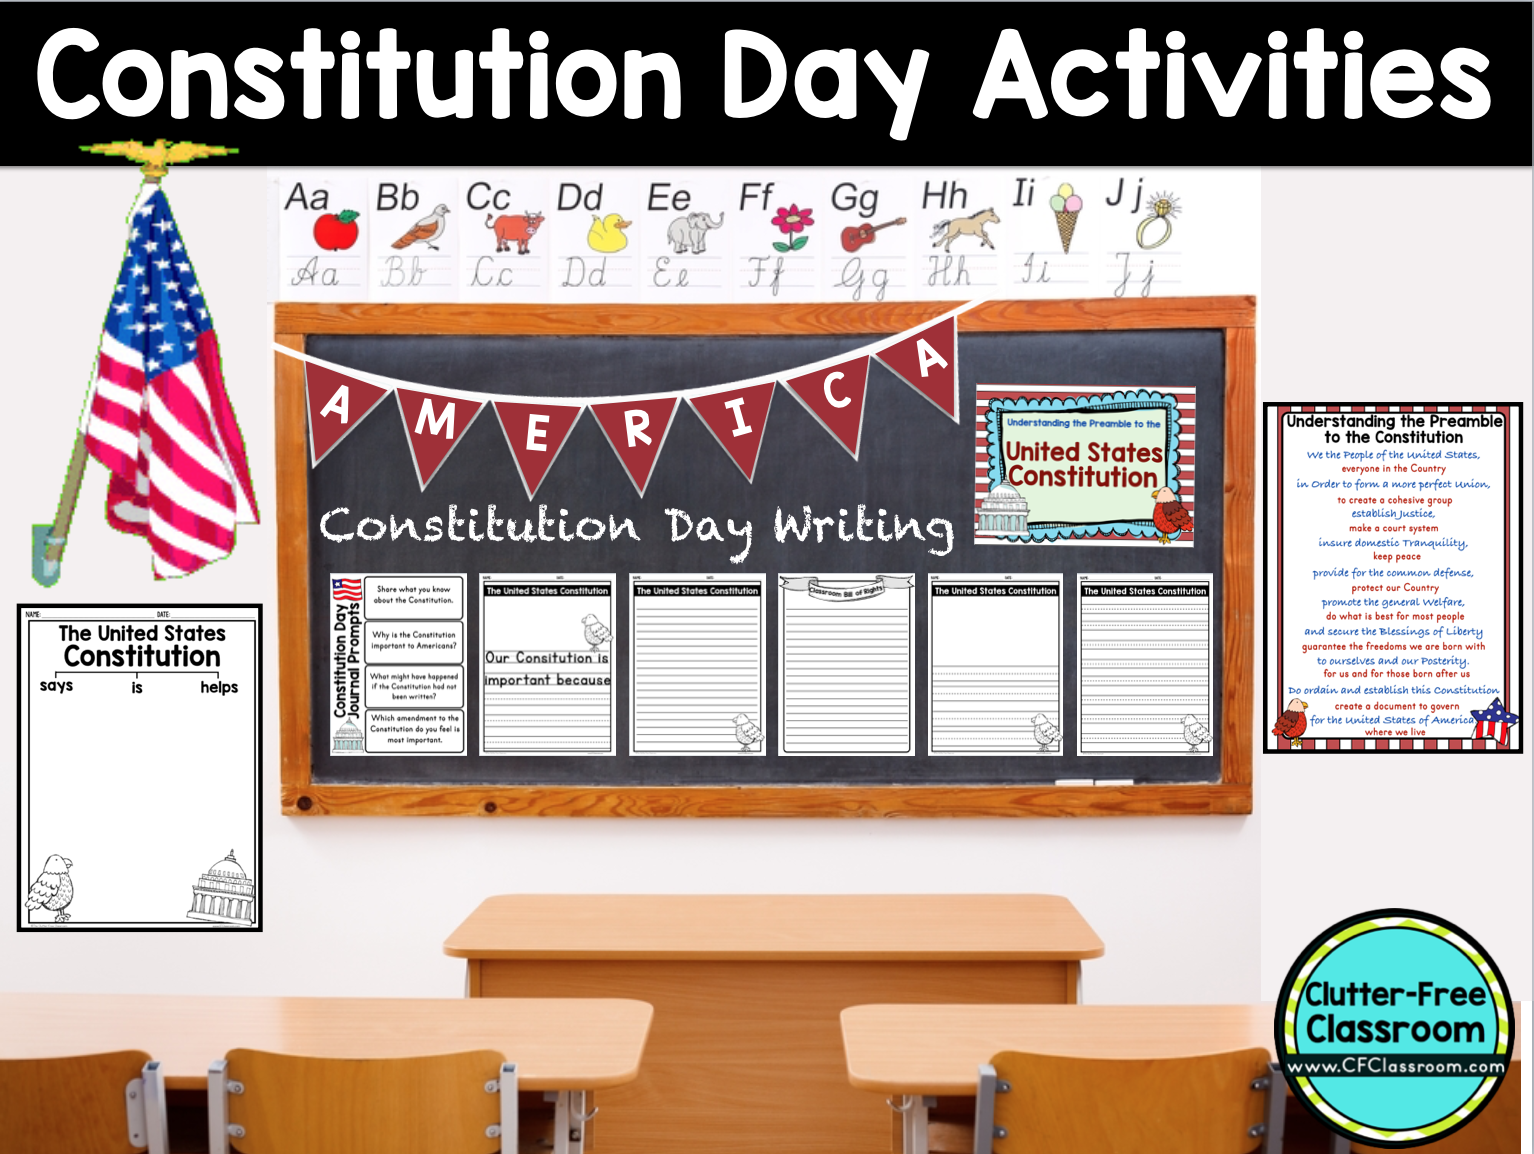 Did you know ALL public school teachers MUST teach a lesson about the Constitution on Constitution Day every September? This post by the Clutter - Free Classroom provides Constitution Day Activities for Elementary School Students. It also has Constitution Day Resources, Lesson Plans and Printables for Kids and suggests Constitution Day books.